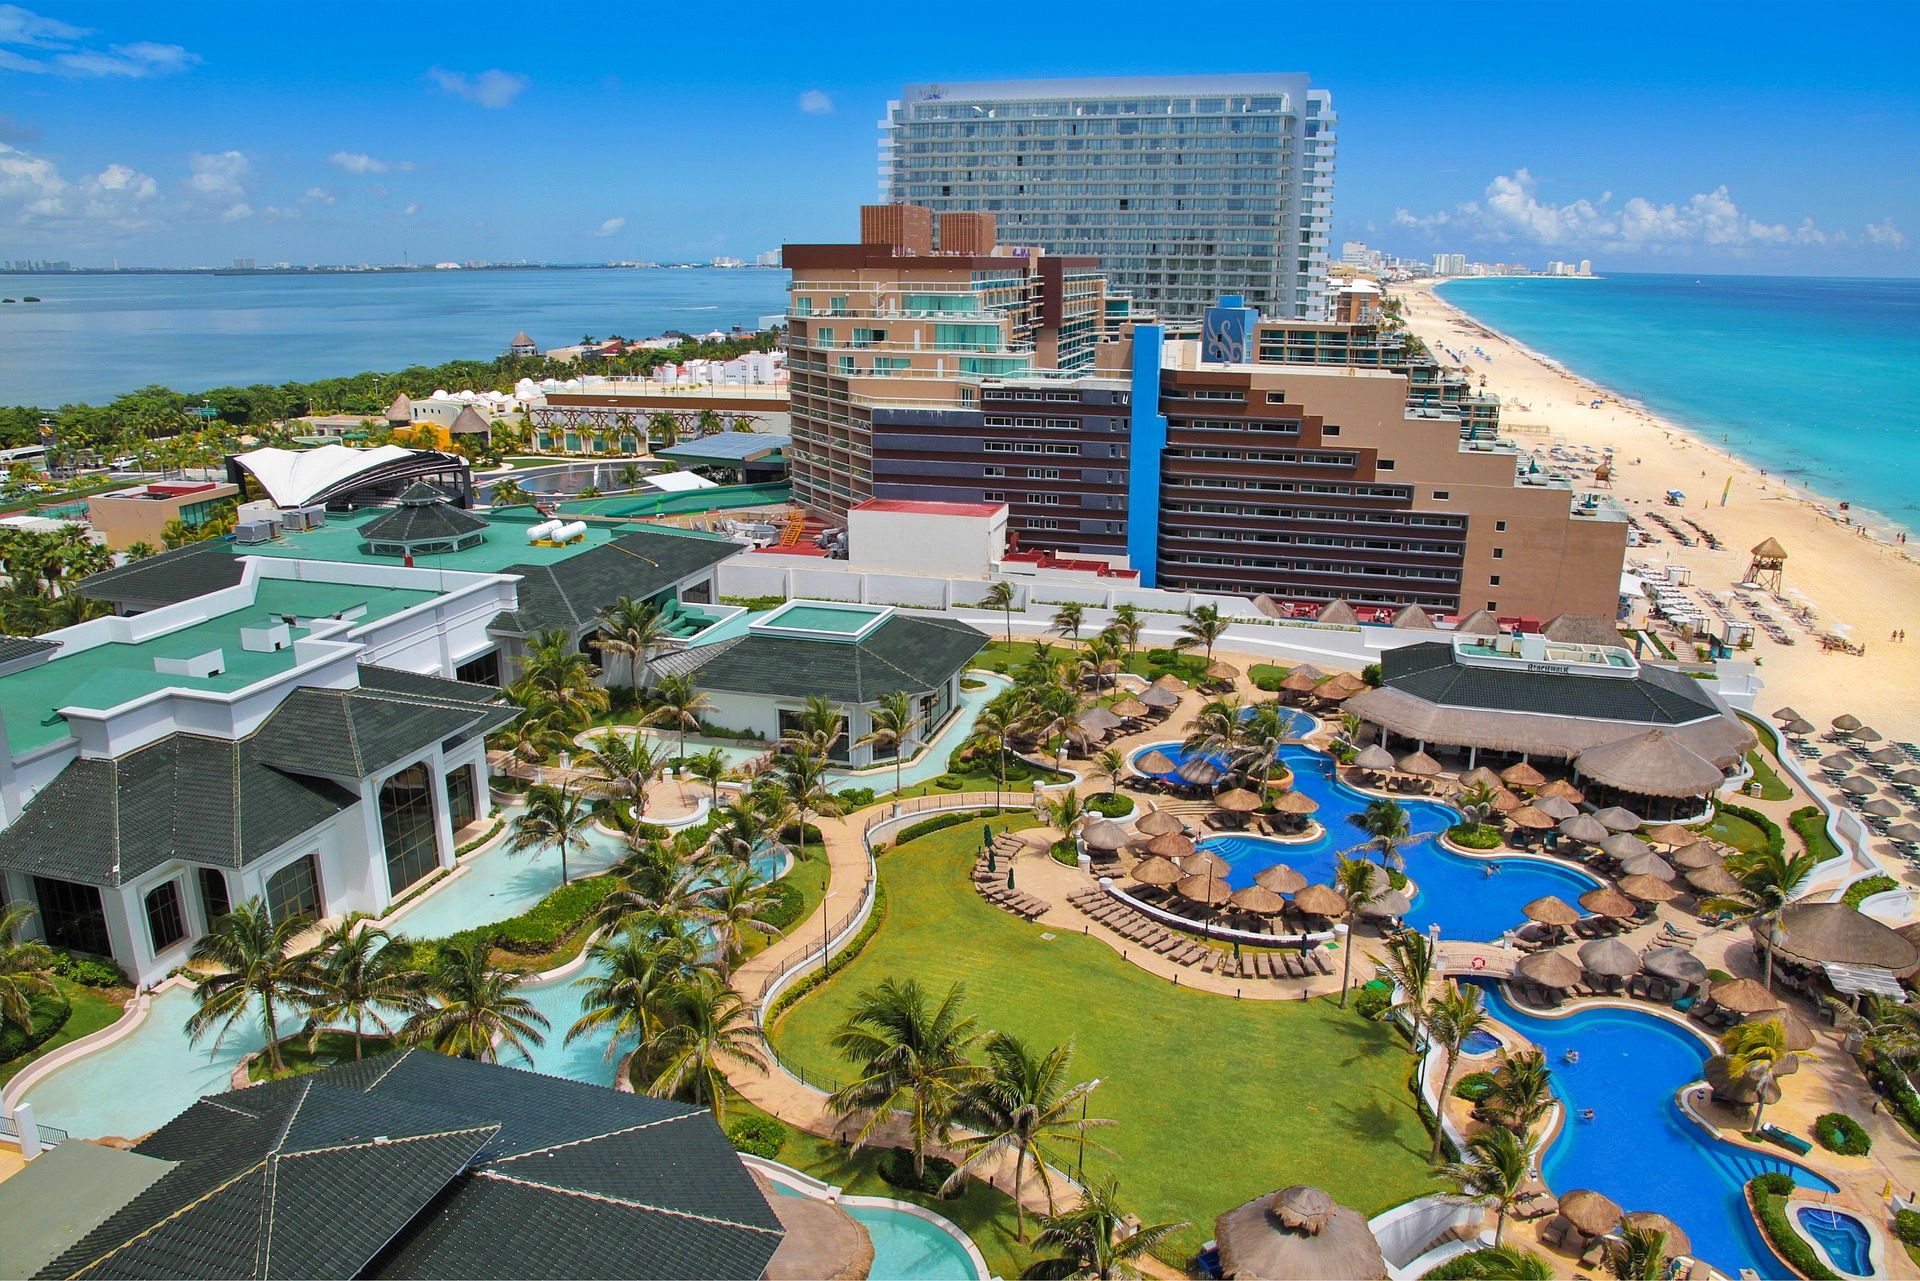 Cancun, one of the top most-visited destinations in Mexico